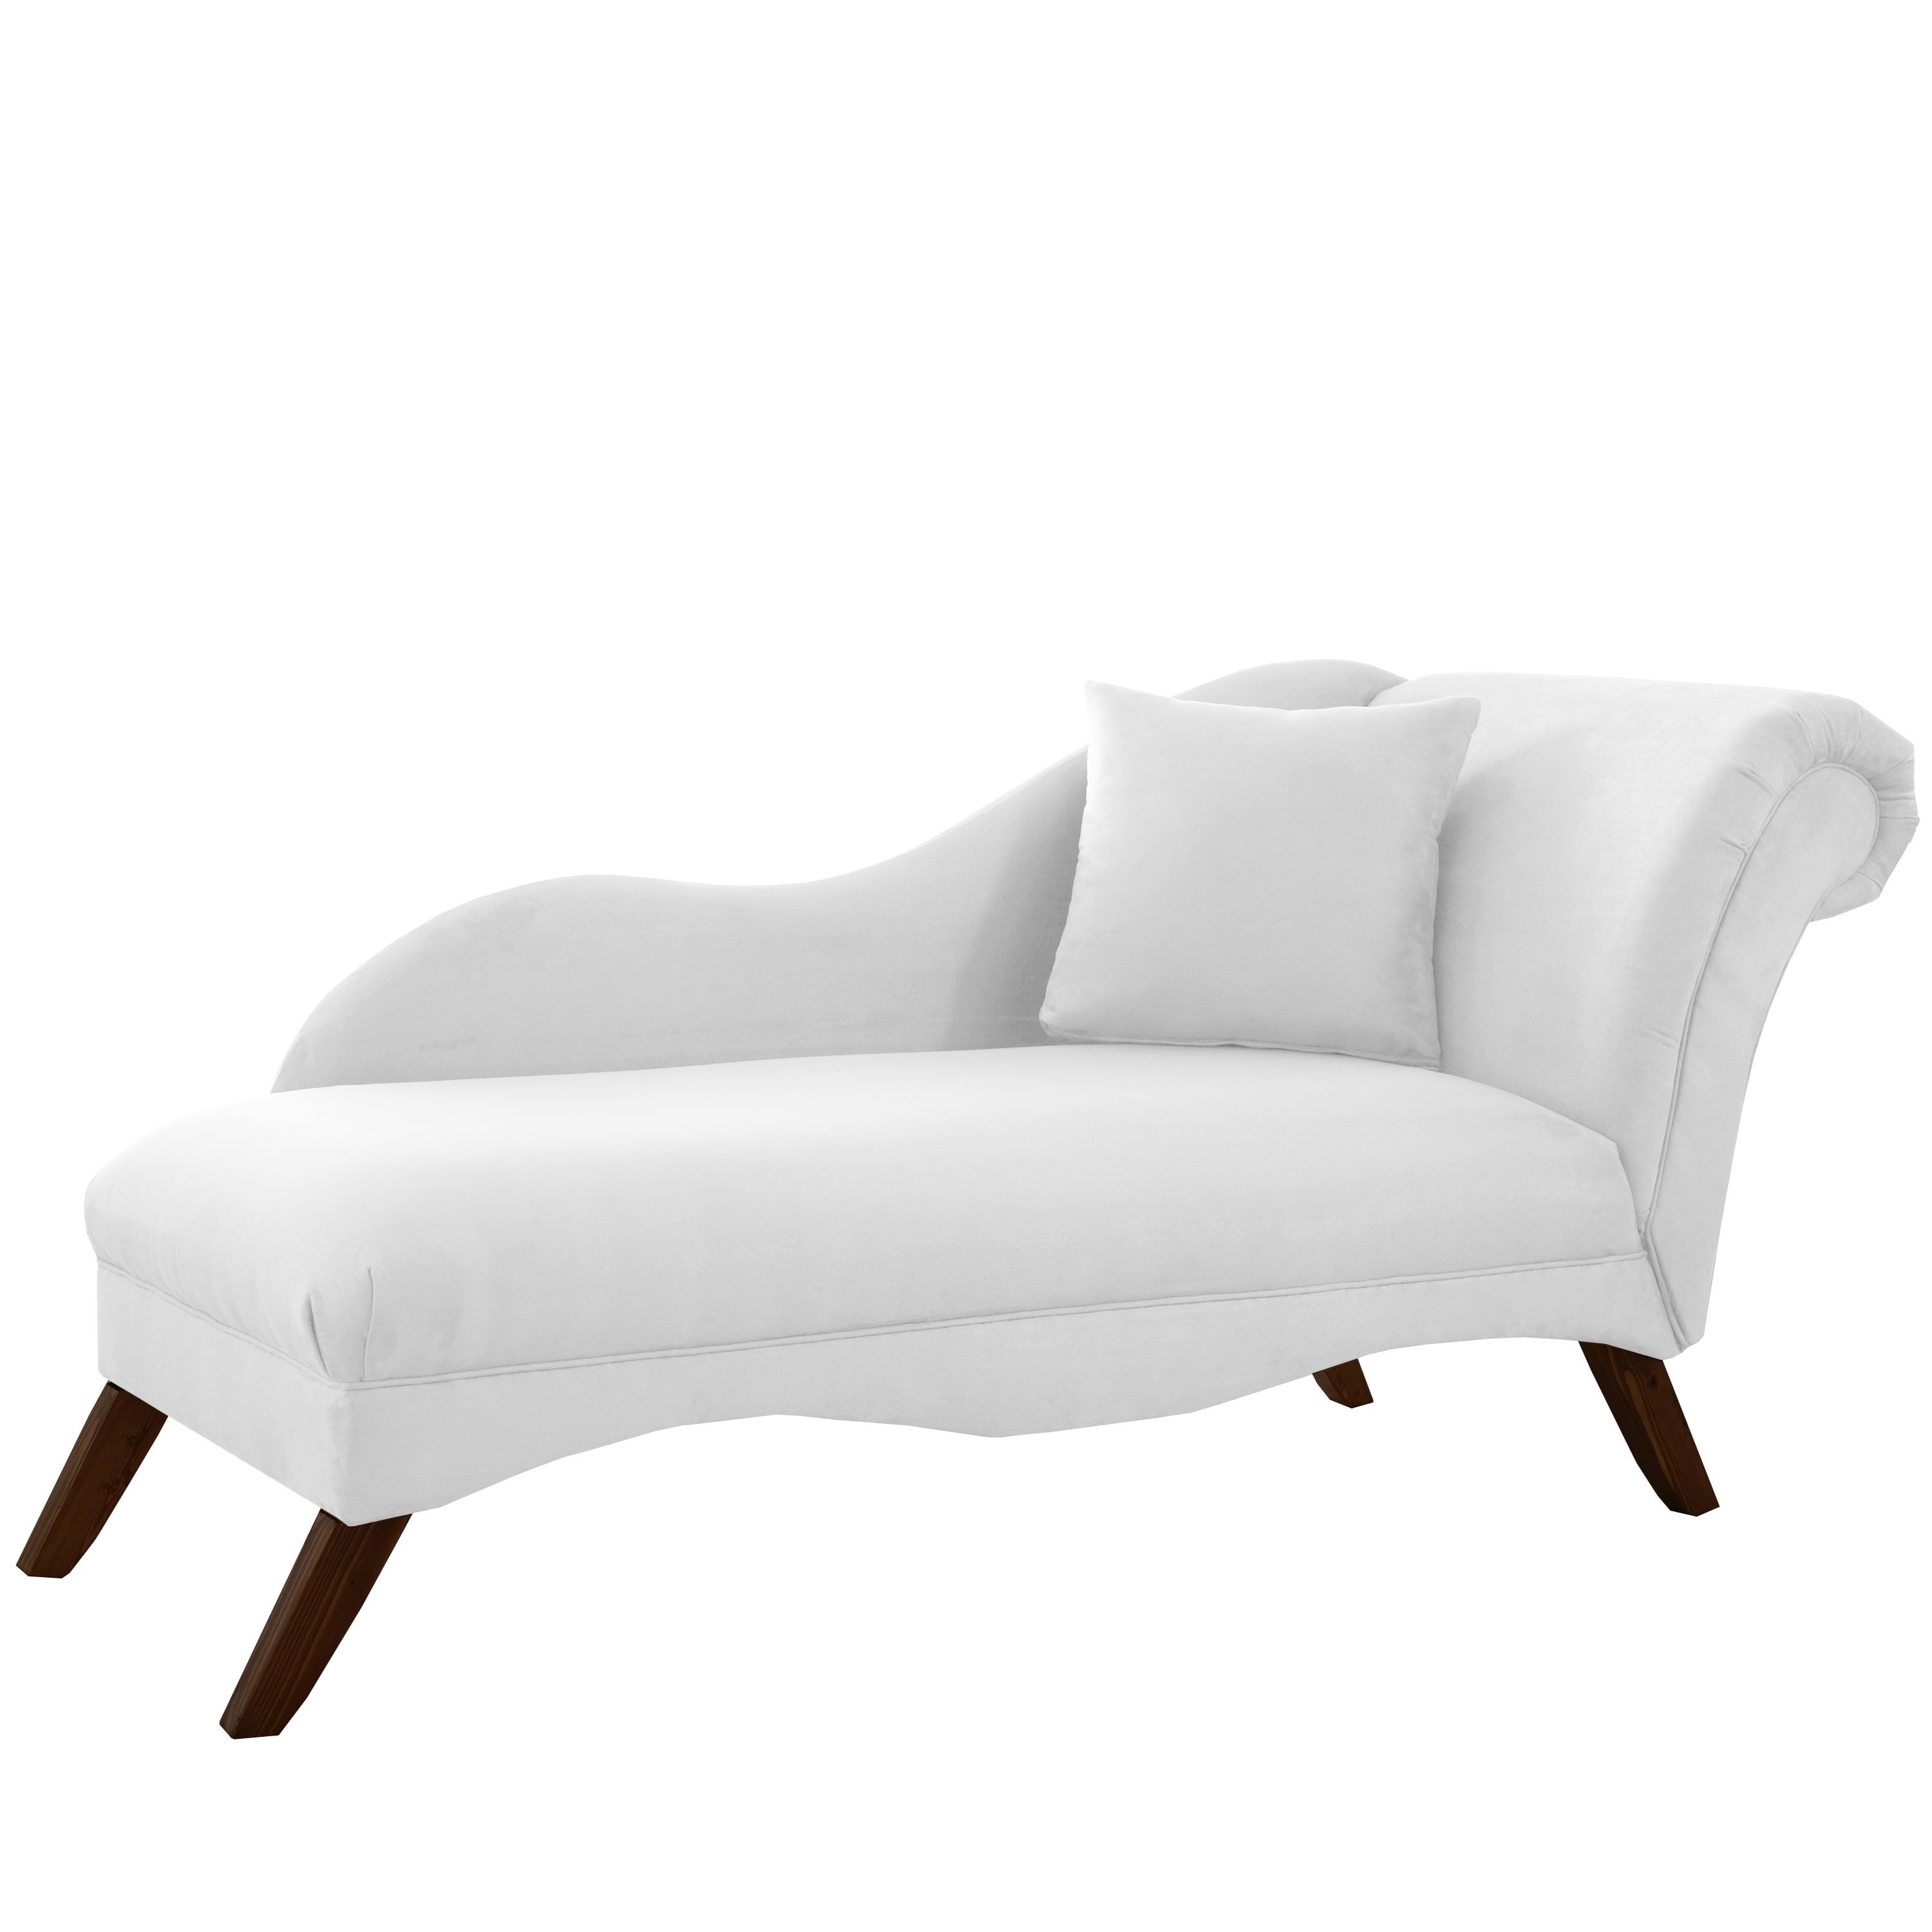 Velvet Chaise Lounges In Recent Skyline Furniture Chaise Lounge In Velvet White – Free Shipping (Photo 14 of 15)